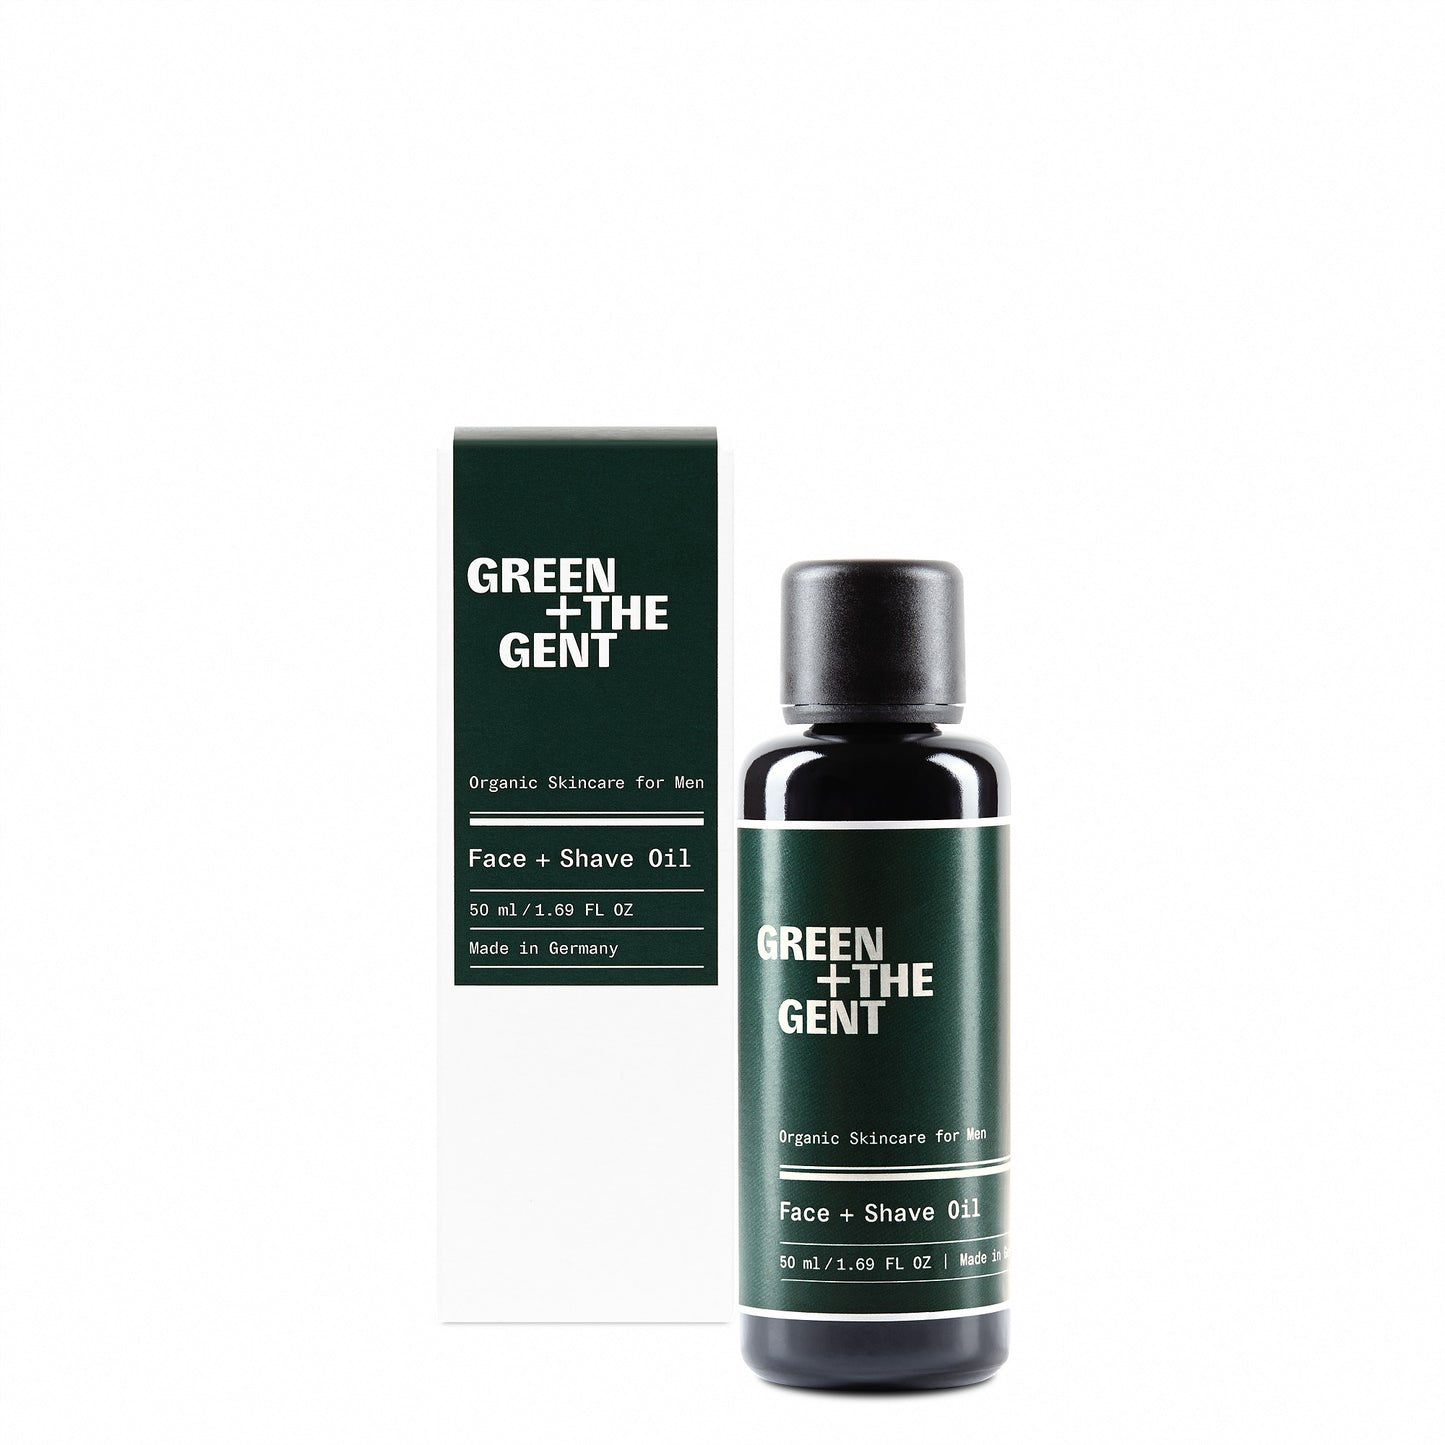 GREEN + THE GENT - Face + Shave Oil - Gesicht - 50 ml